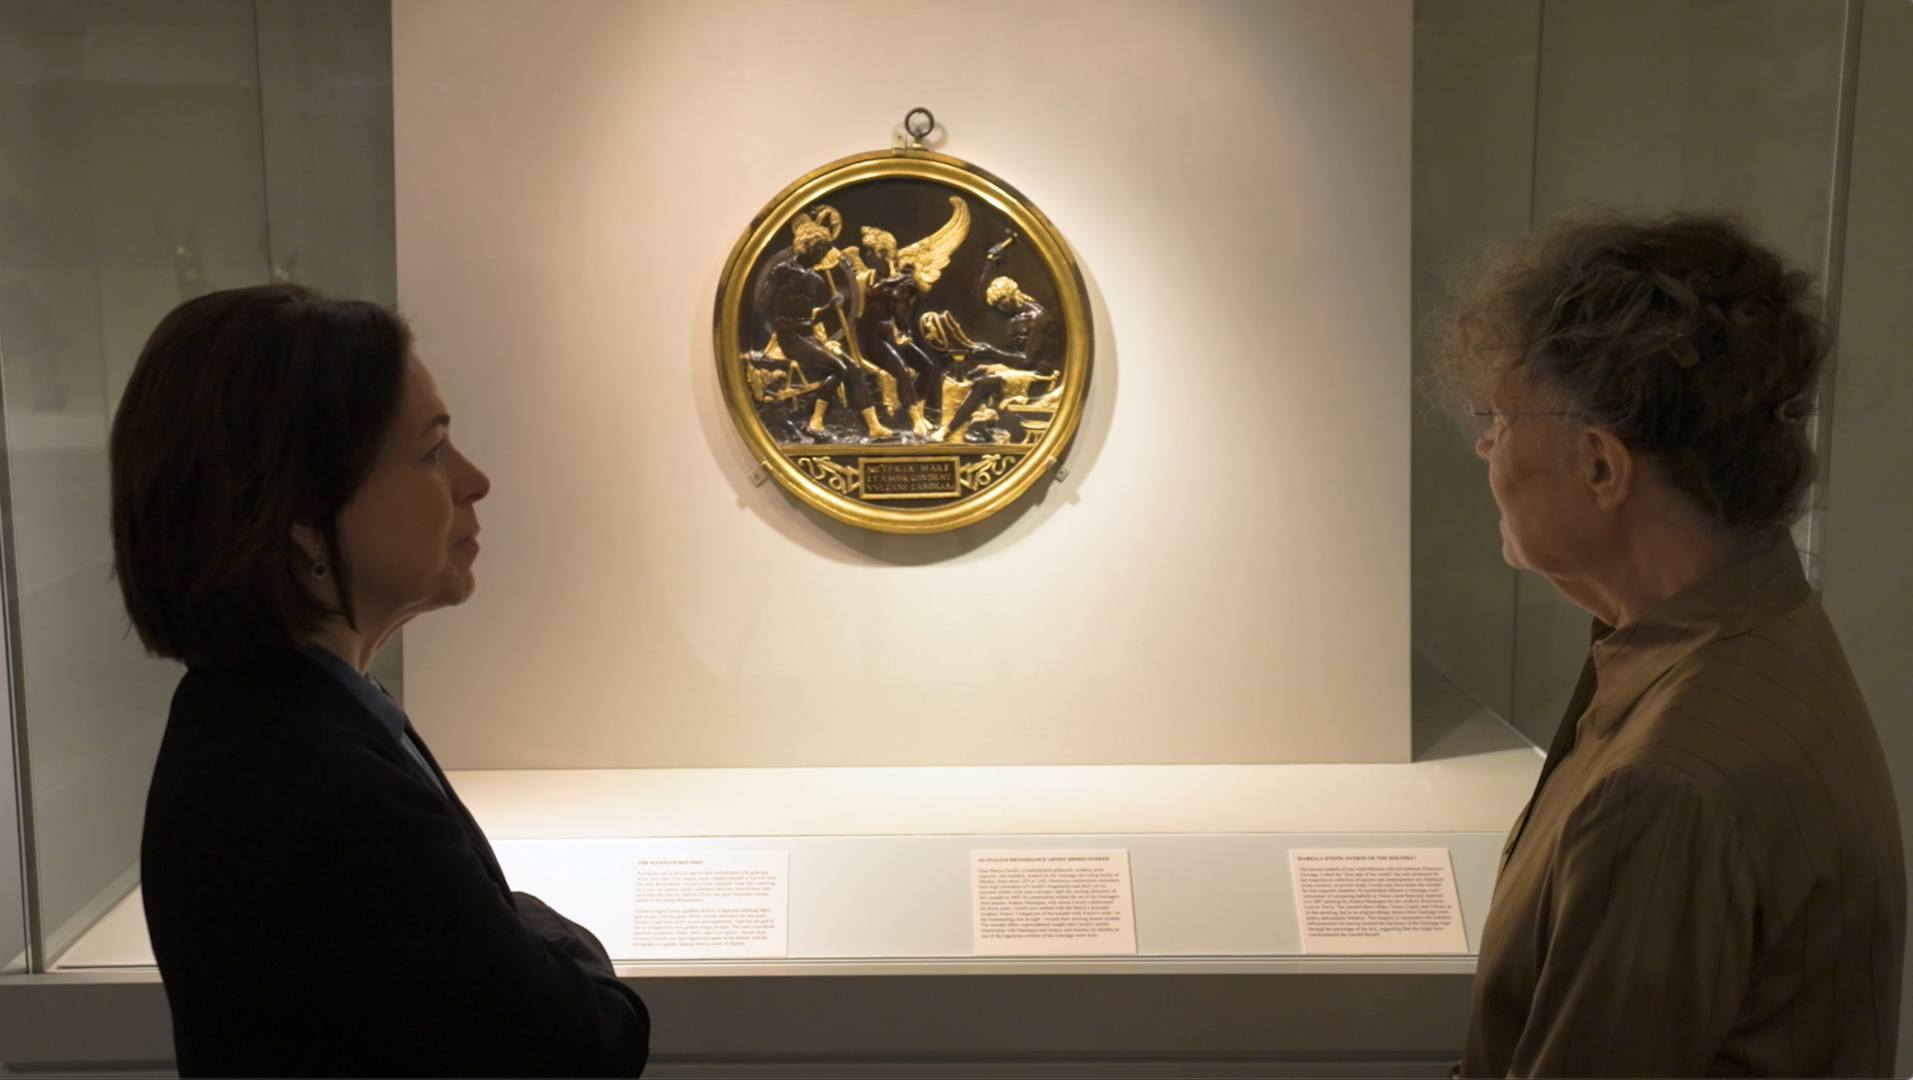 Two curators behold the Mantuan Roundel, installed in the galleries